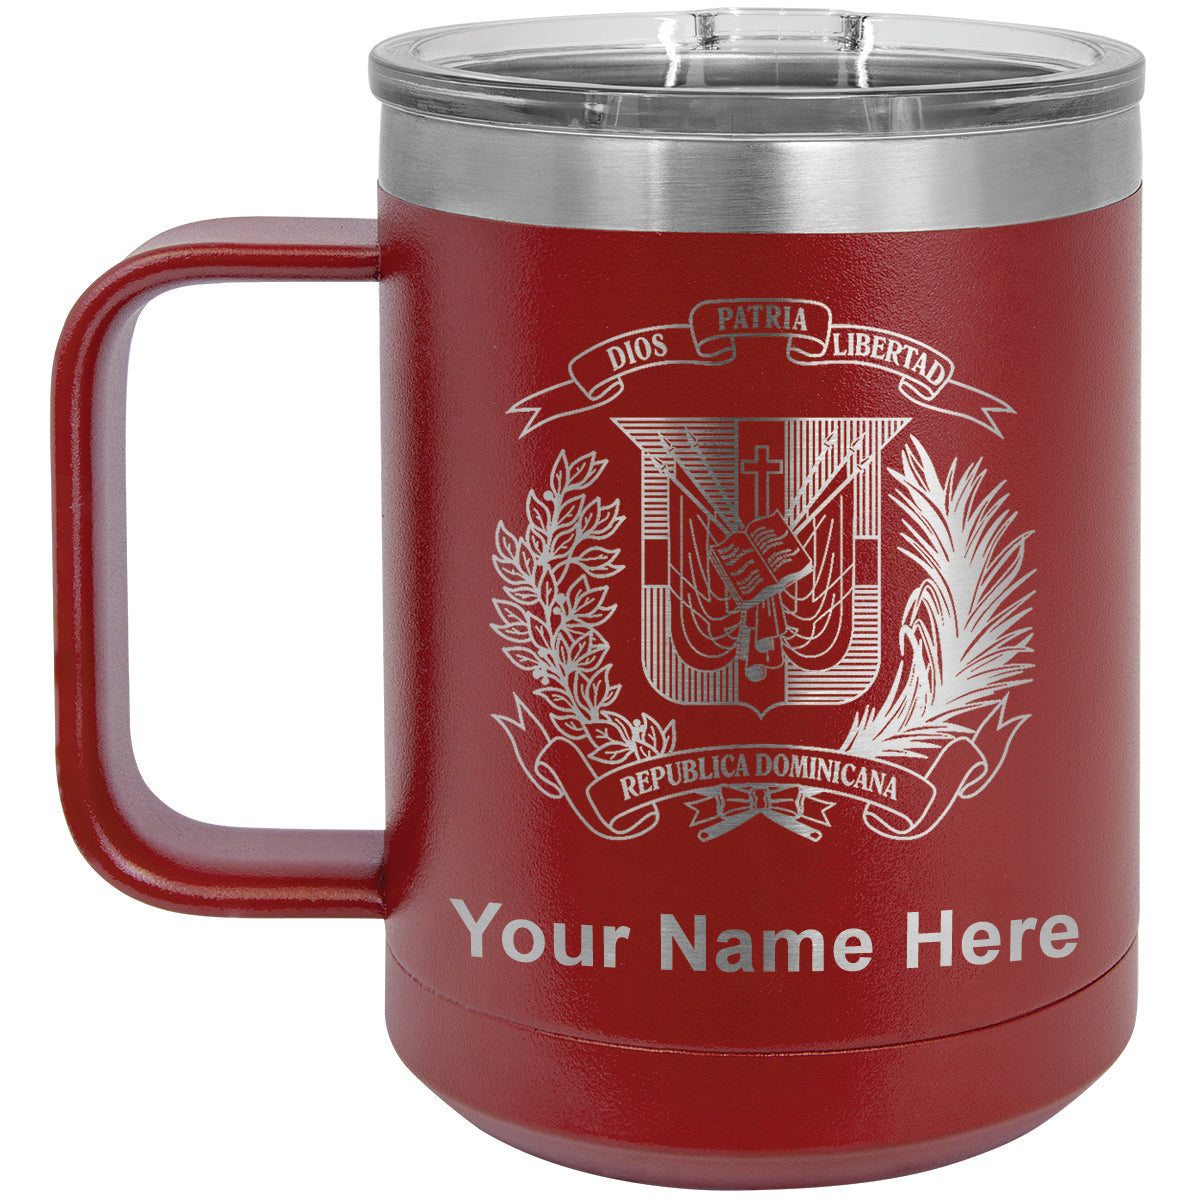 15oz Vacuum Insulated Coffee Mug, Coat of Arms Dominican Republic, Personalized Engraving Included